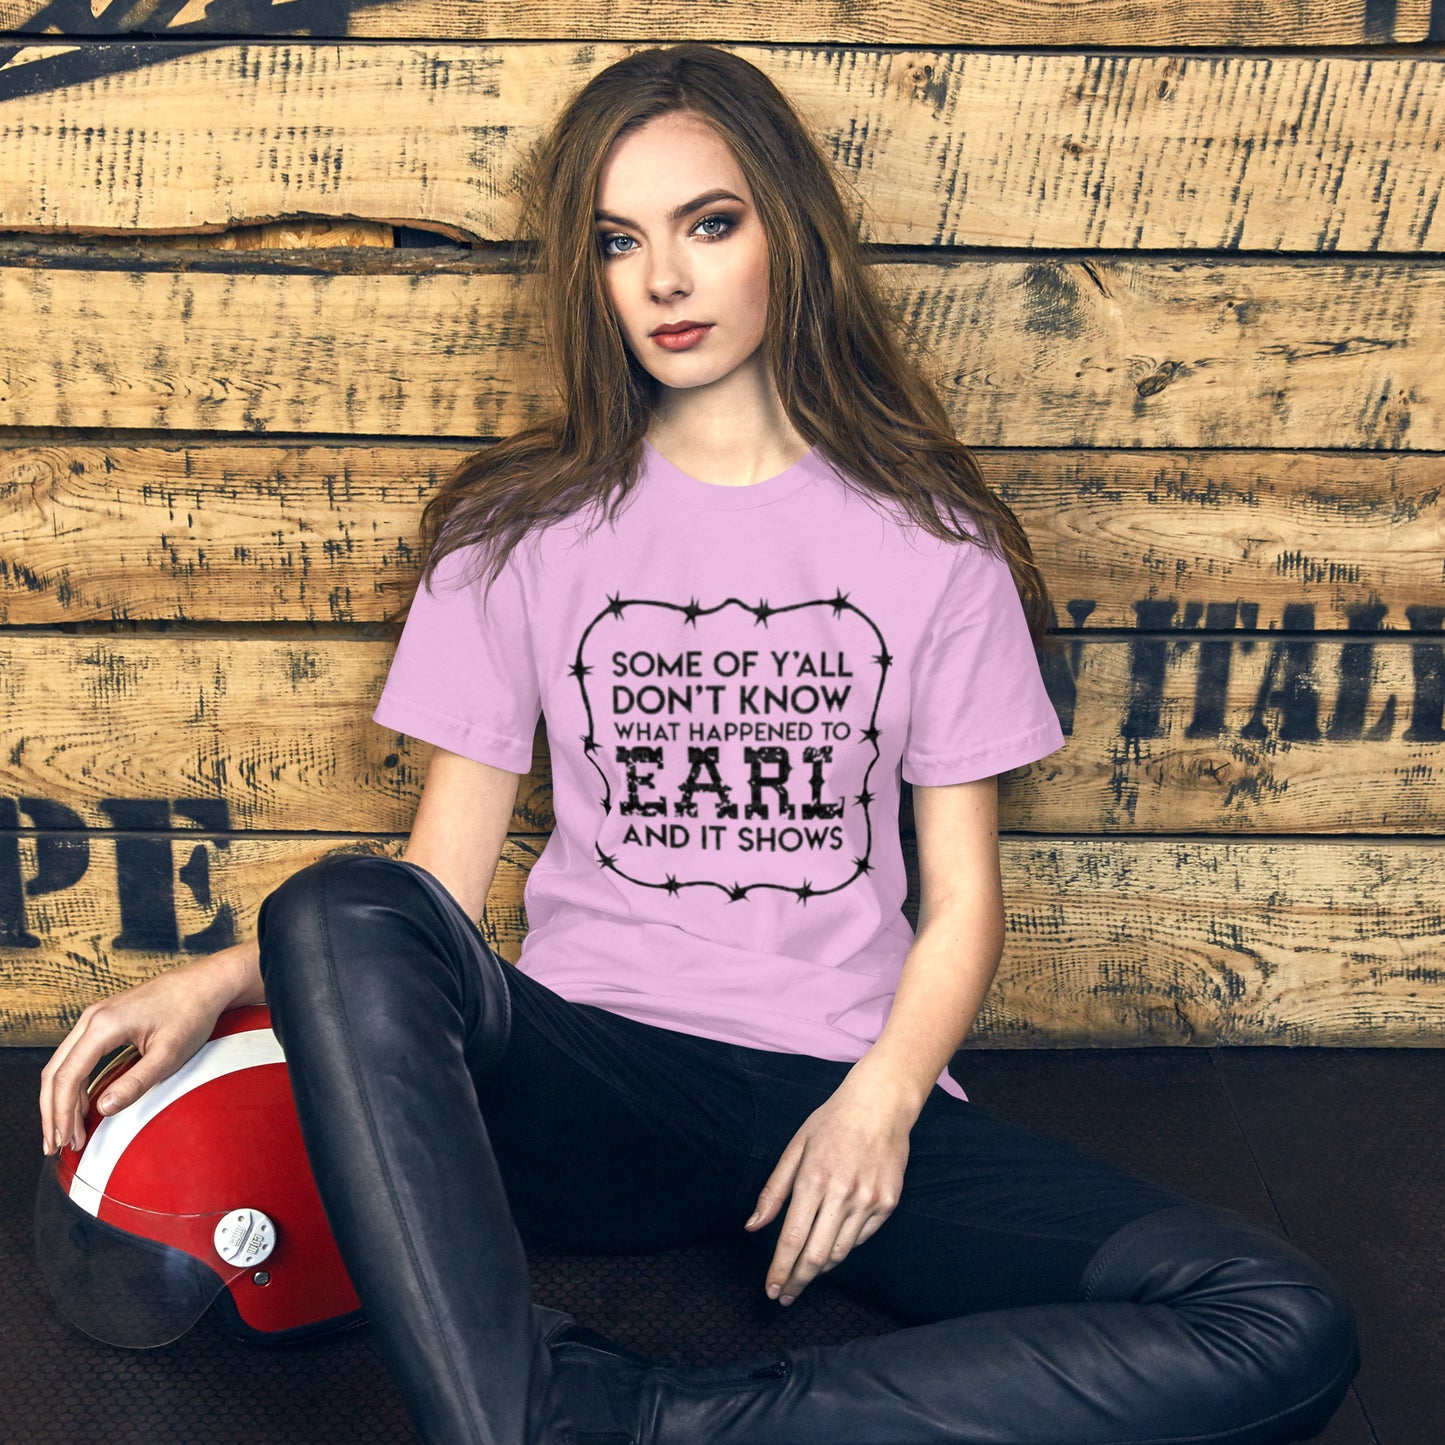 Earl - Get Your Twang On with Classic Country Tees - The Ultimate Unisex T-Shirt for True Country Souls! - Classic Country Tees